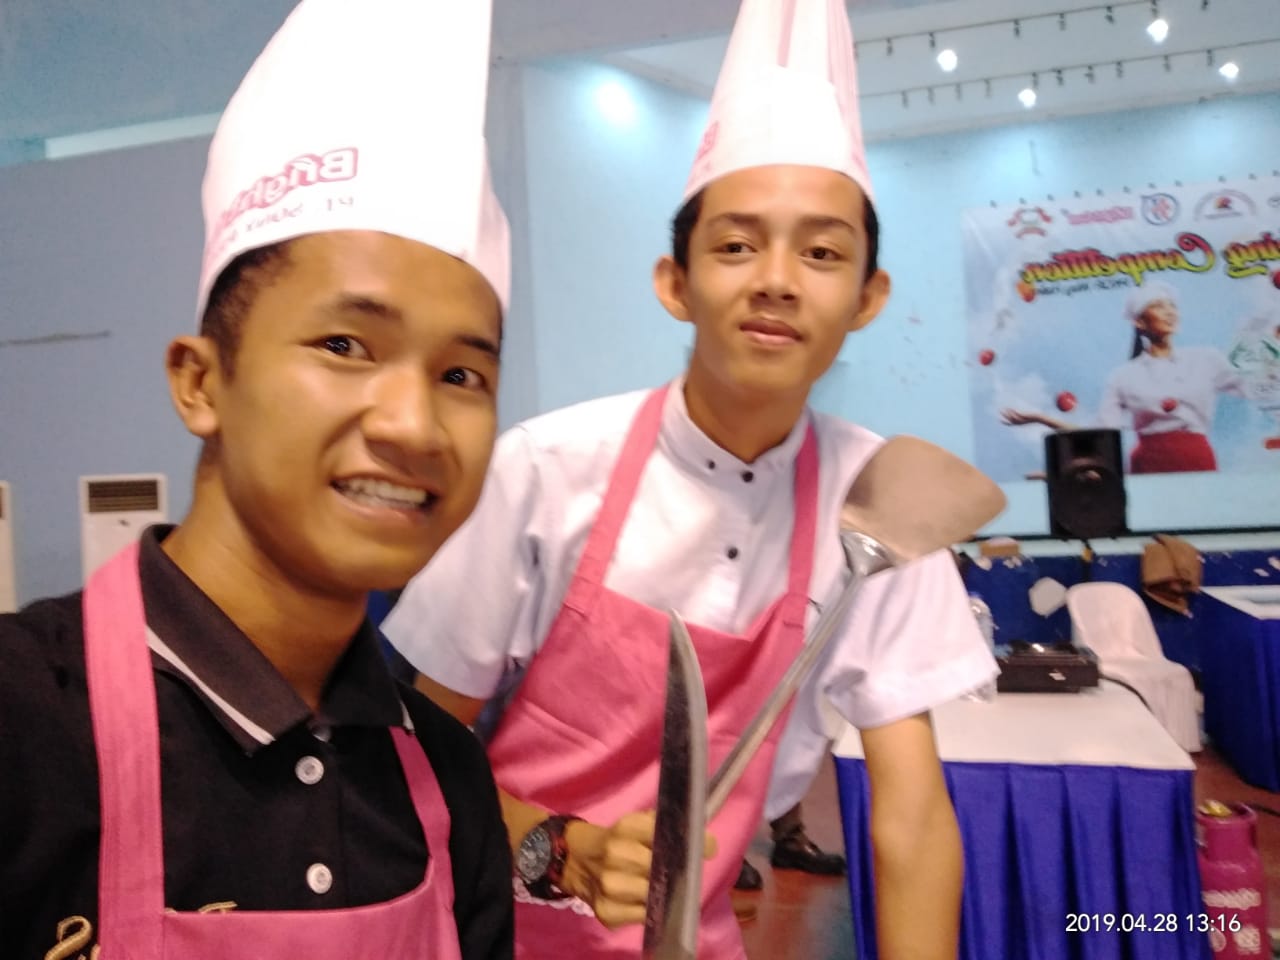 Cooking competitions